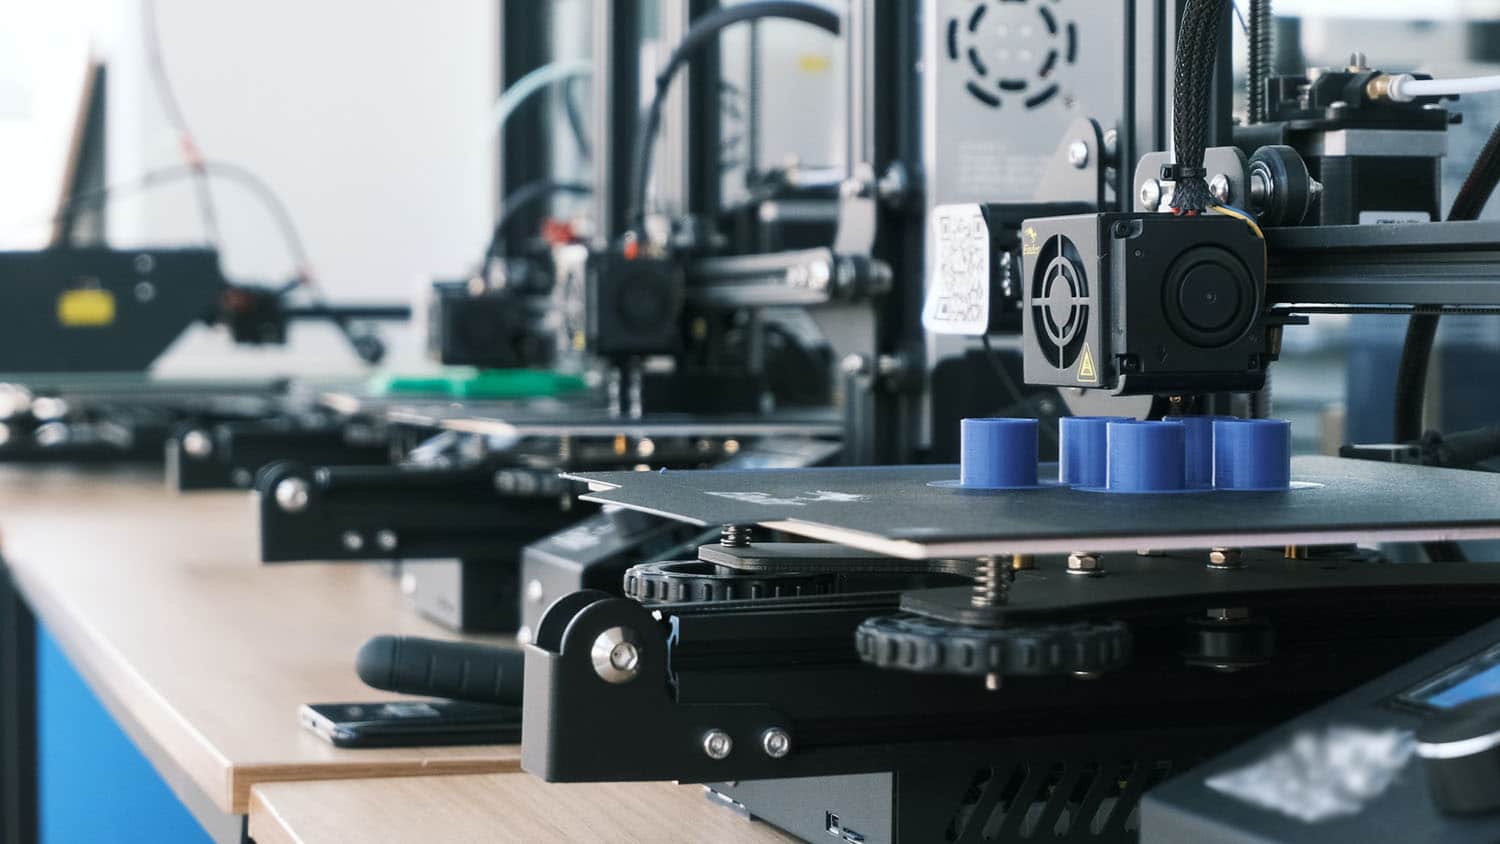 several 3d printers are lined up on a workbench; one of them is printing an object